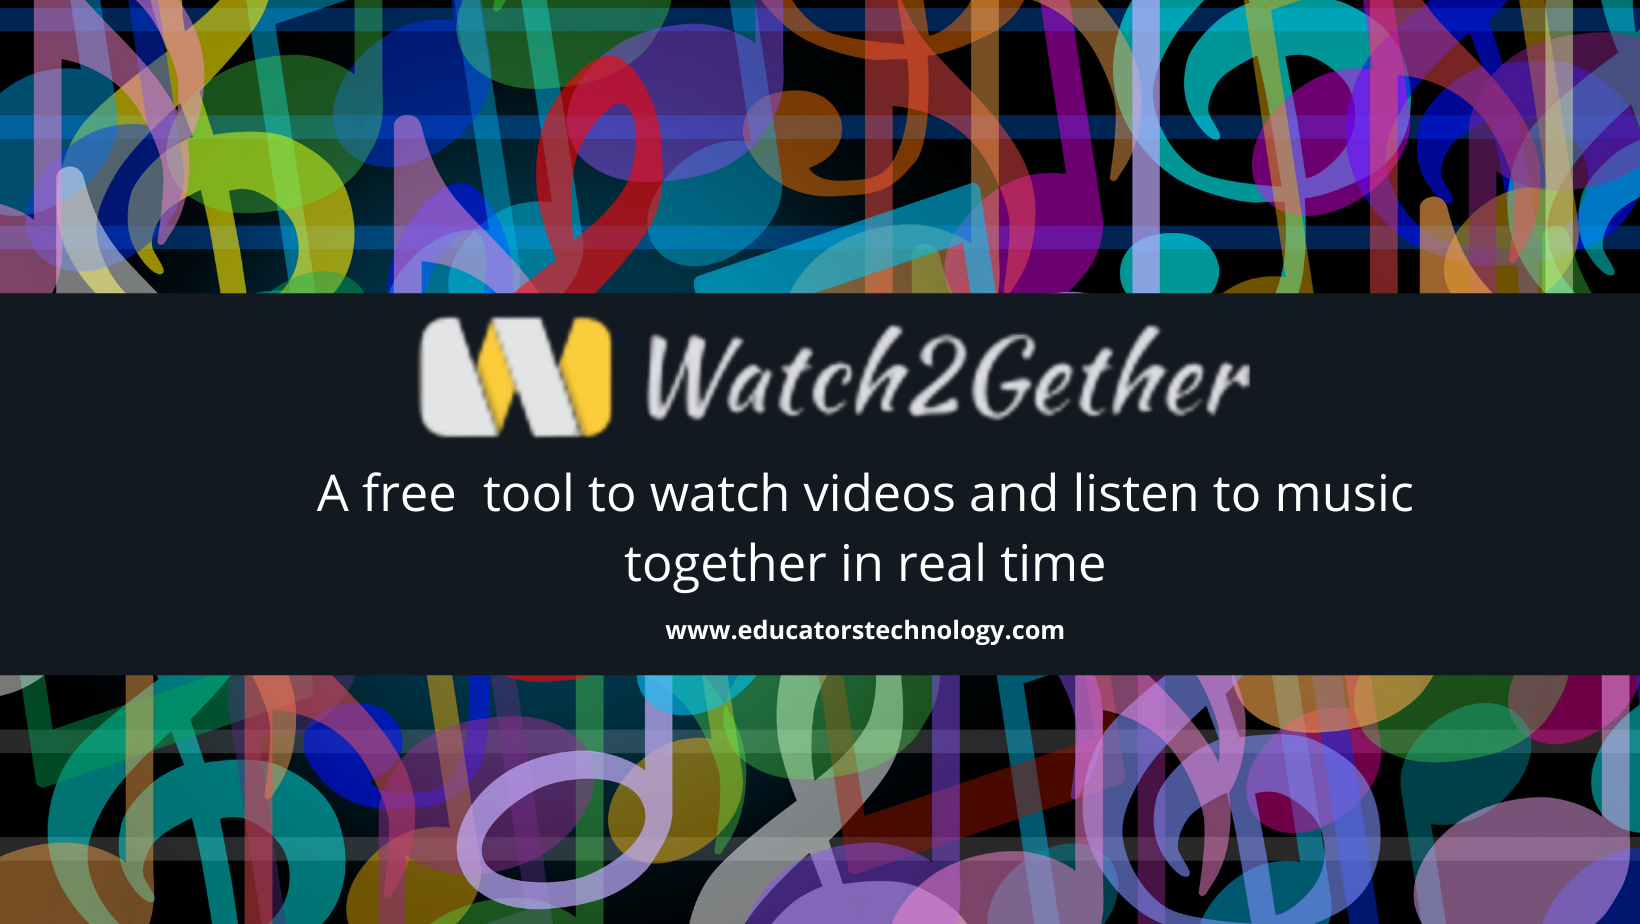 Watch2Gether review